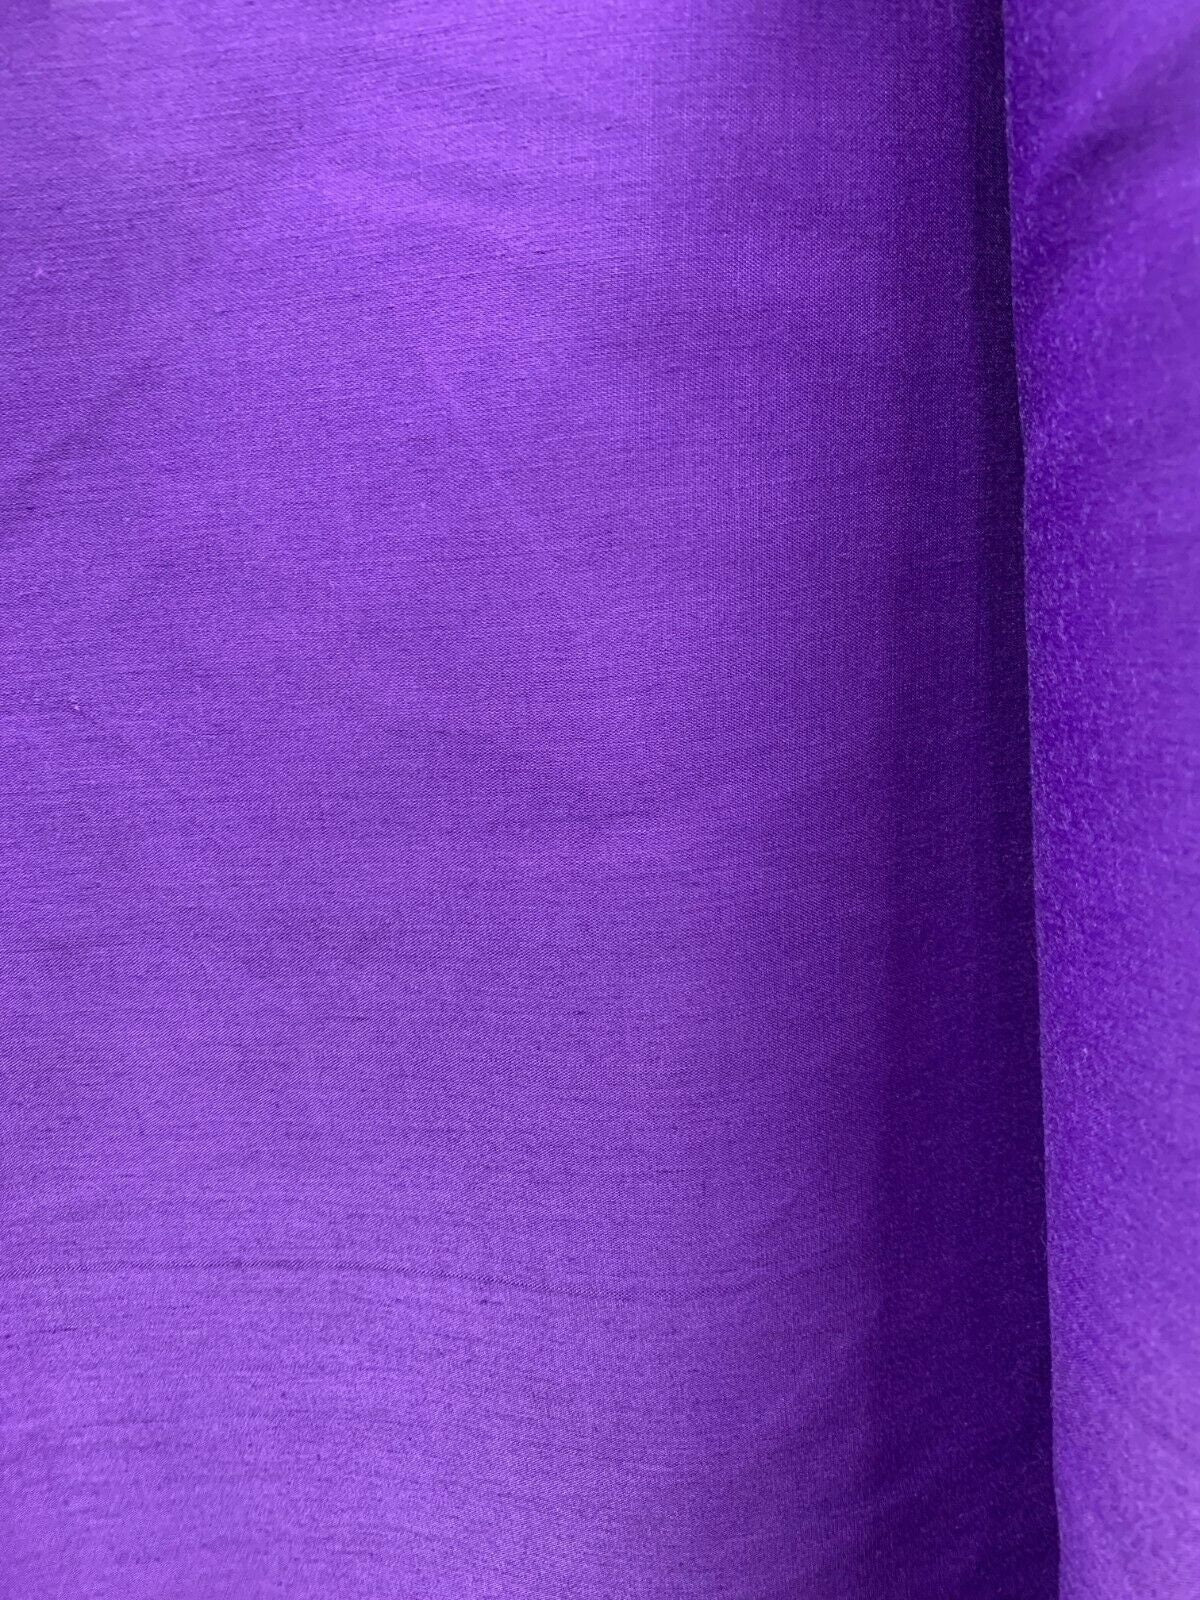 PURPLE Light Weight Cotton Fabric (45 in.) Sold By The Yard